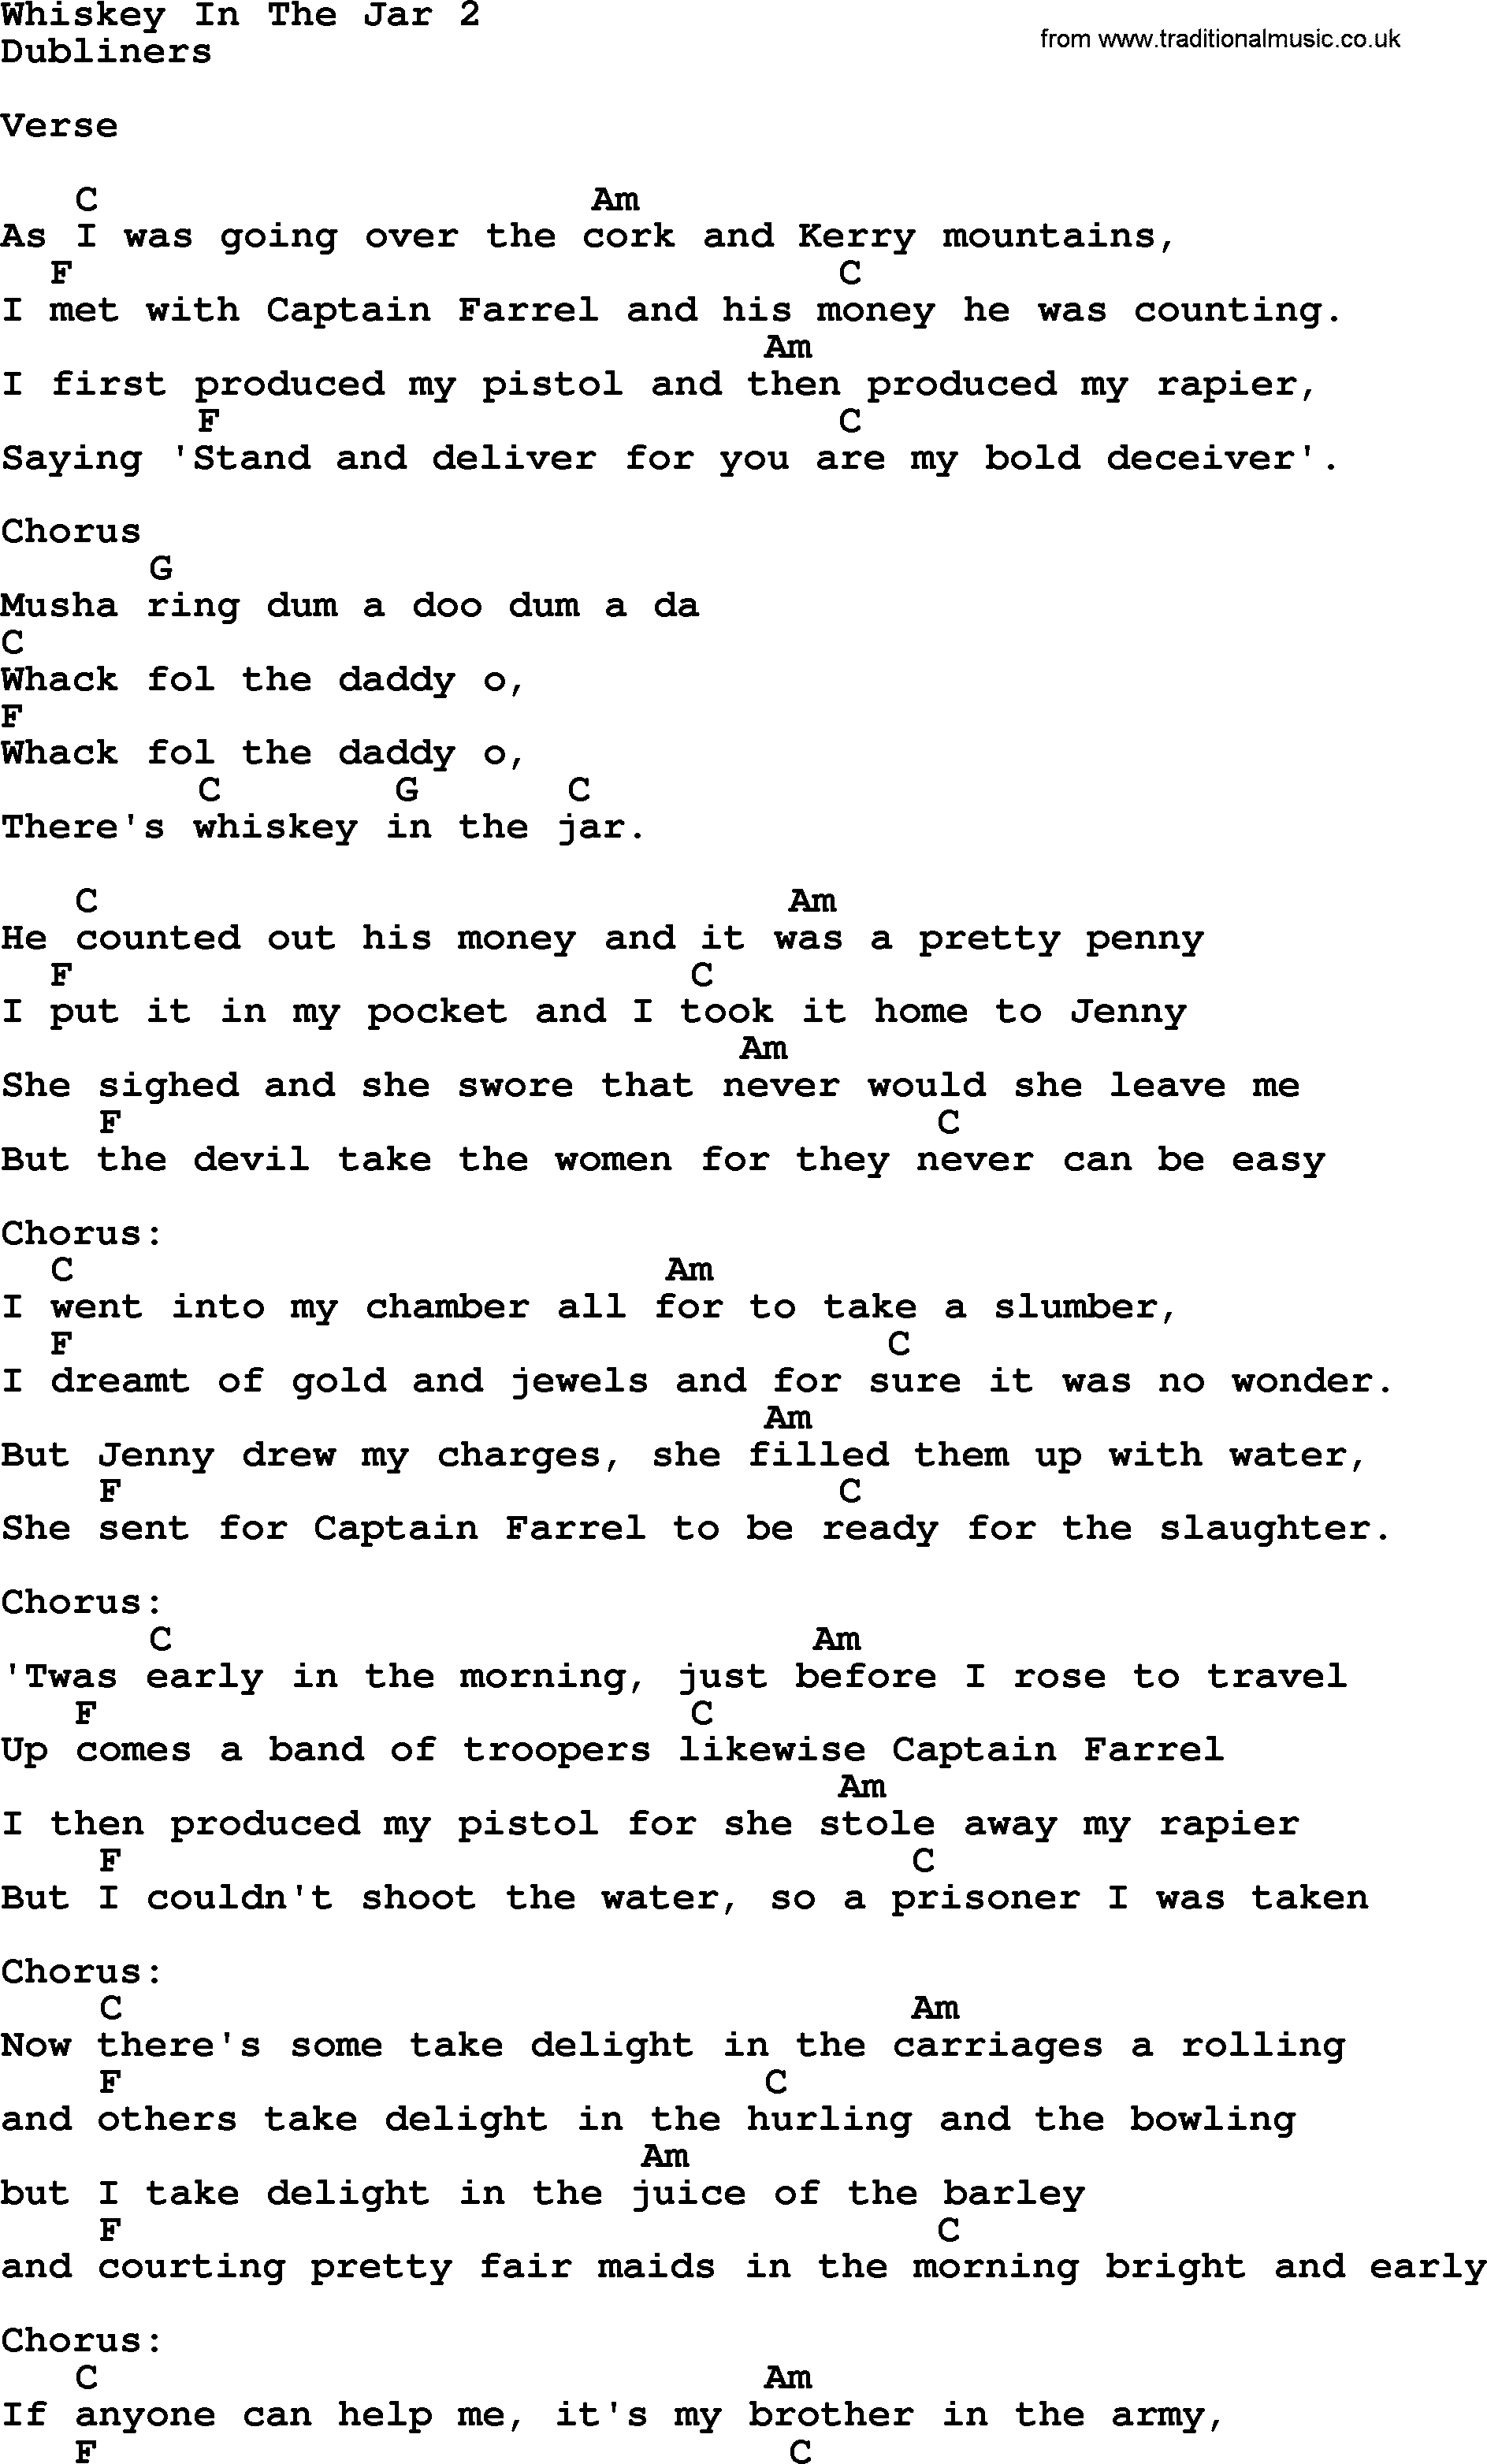 Whiskey In The Jar Ver2 by The Dubliners - song lyrics and chords